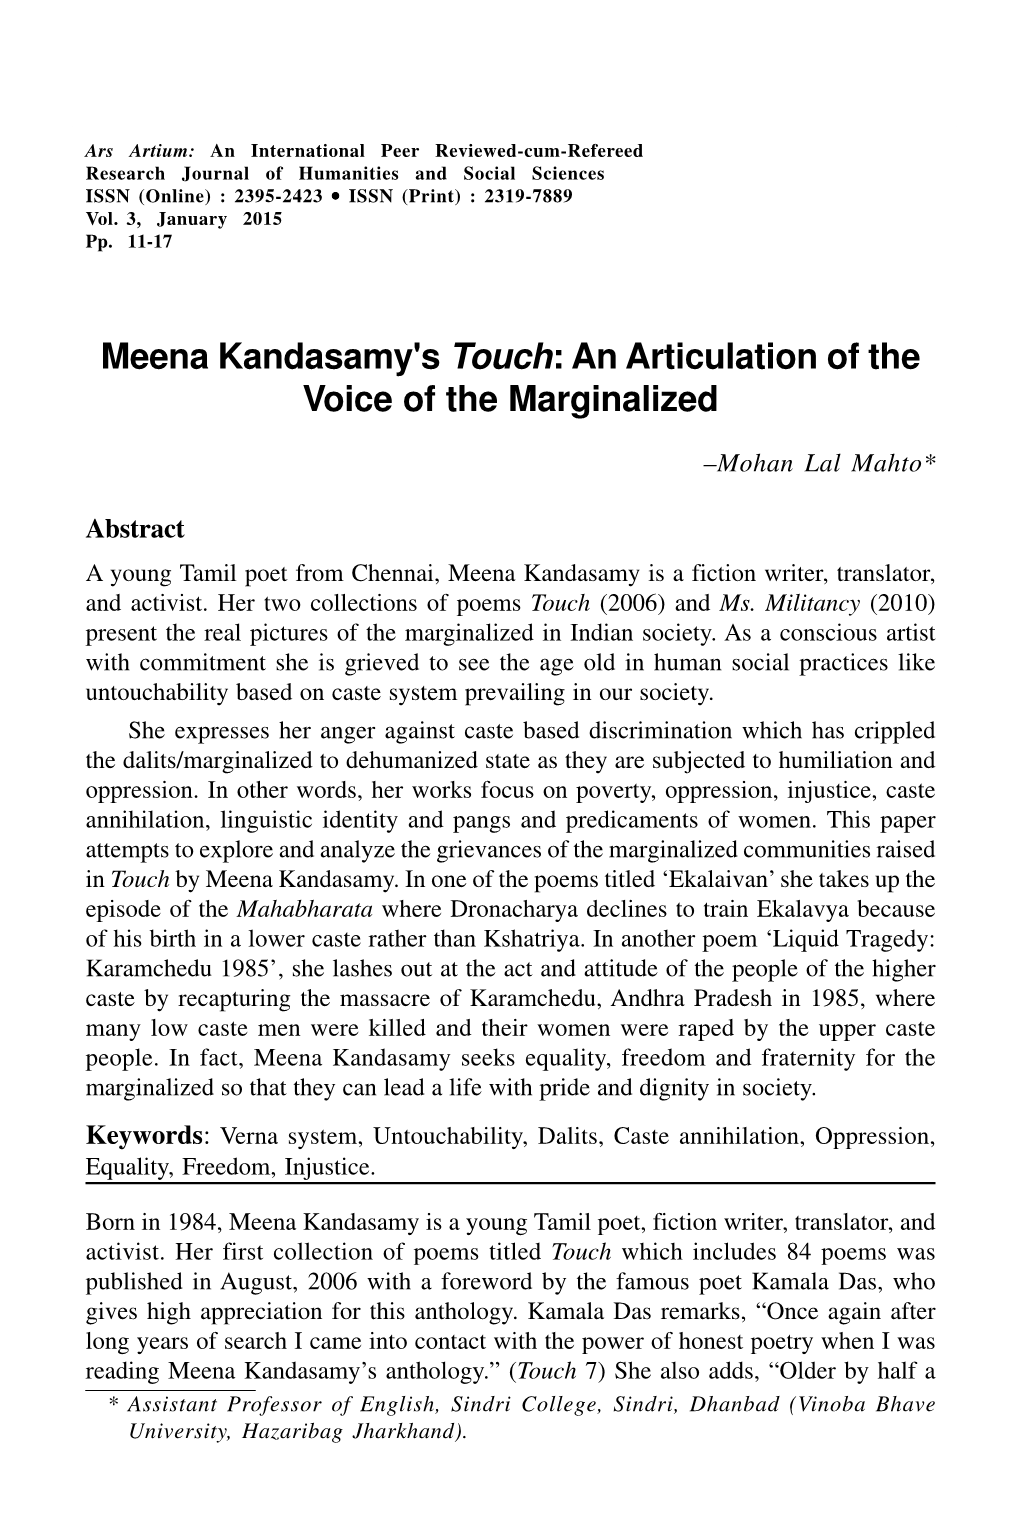 Meena Kandasamy's Touch: an Articulation of the Voice of the Marginalized